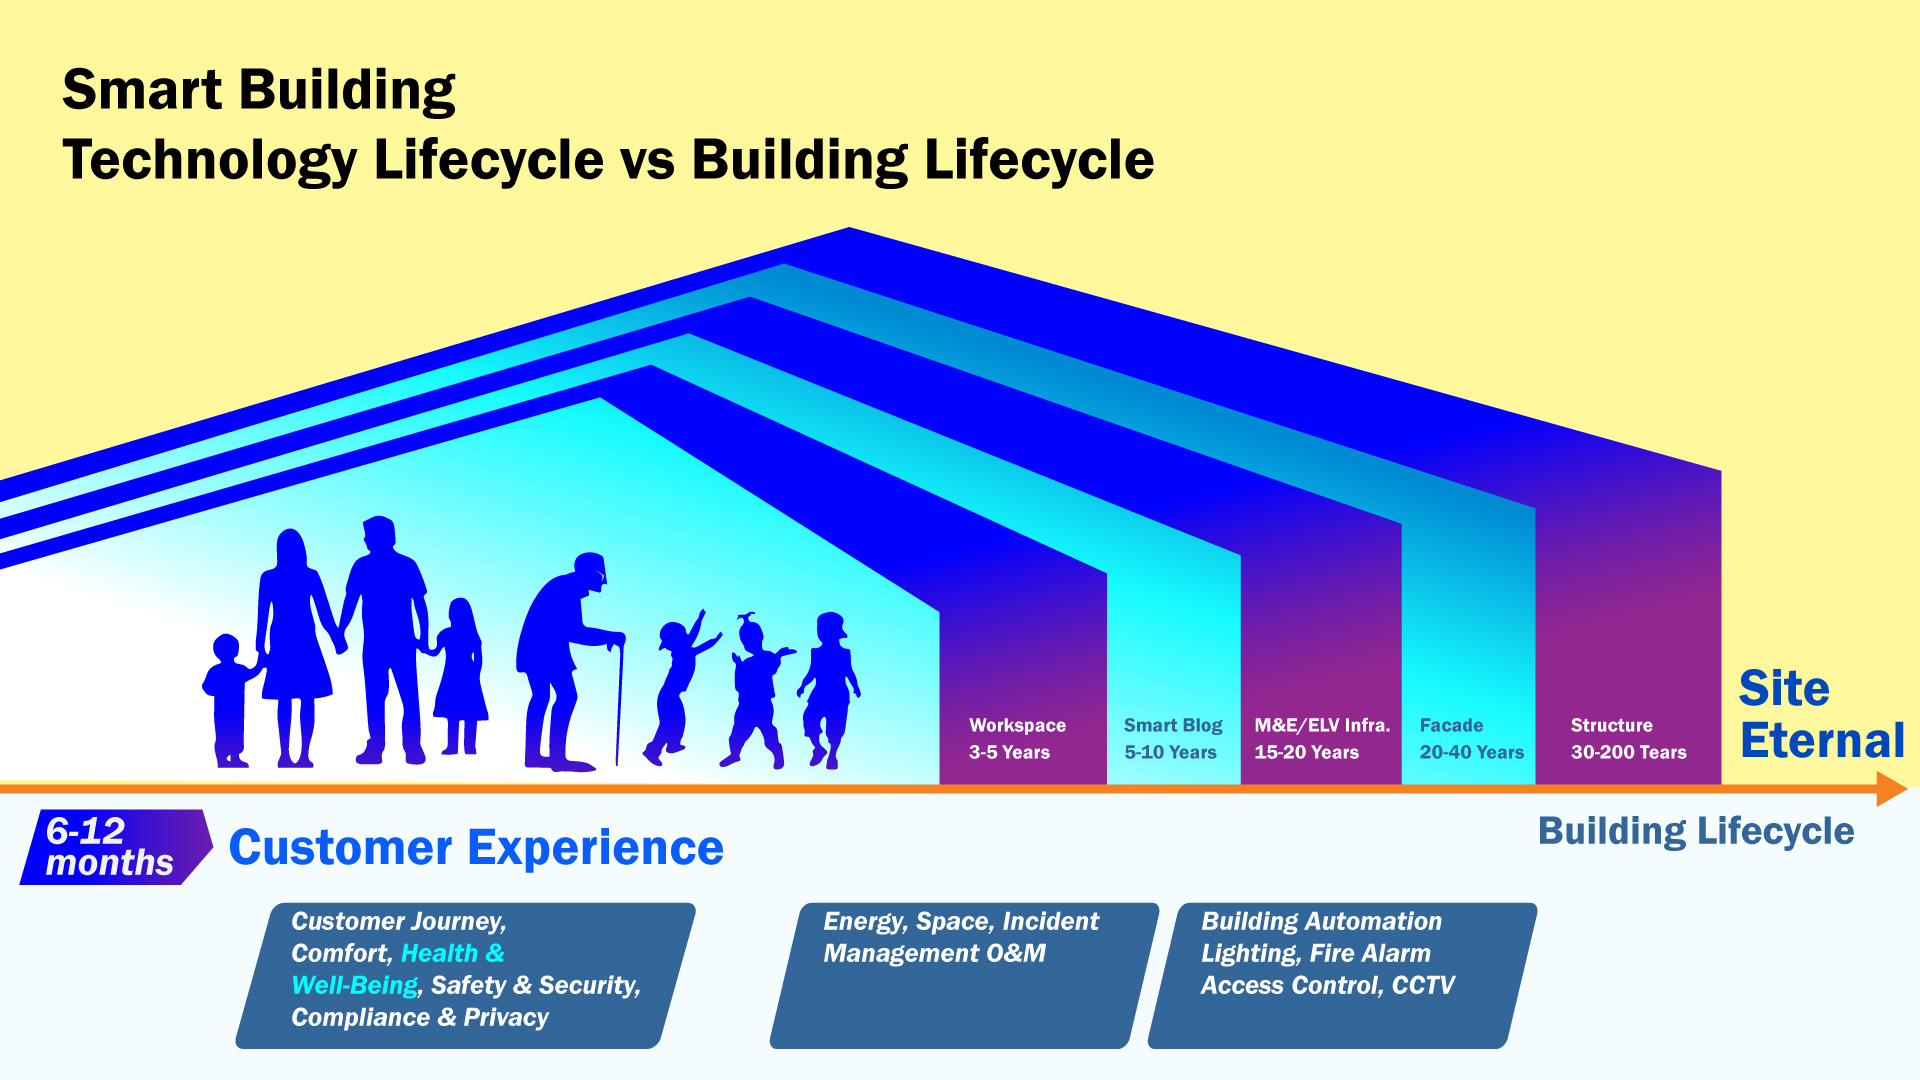 Smart Building Technology Lifecycle vs Building Lifecycle